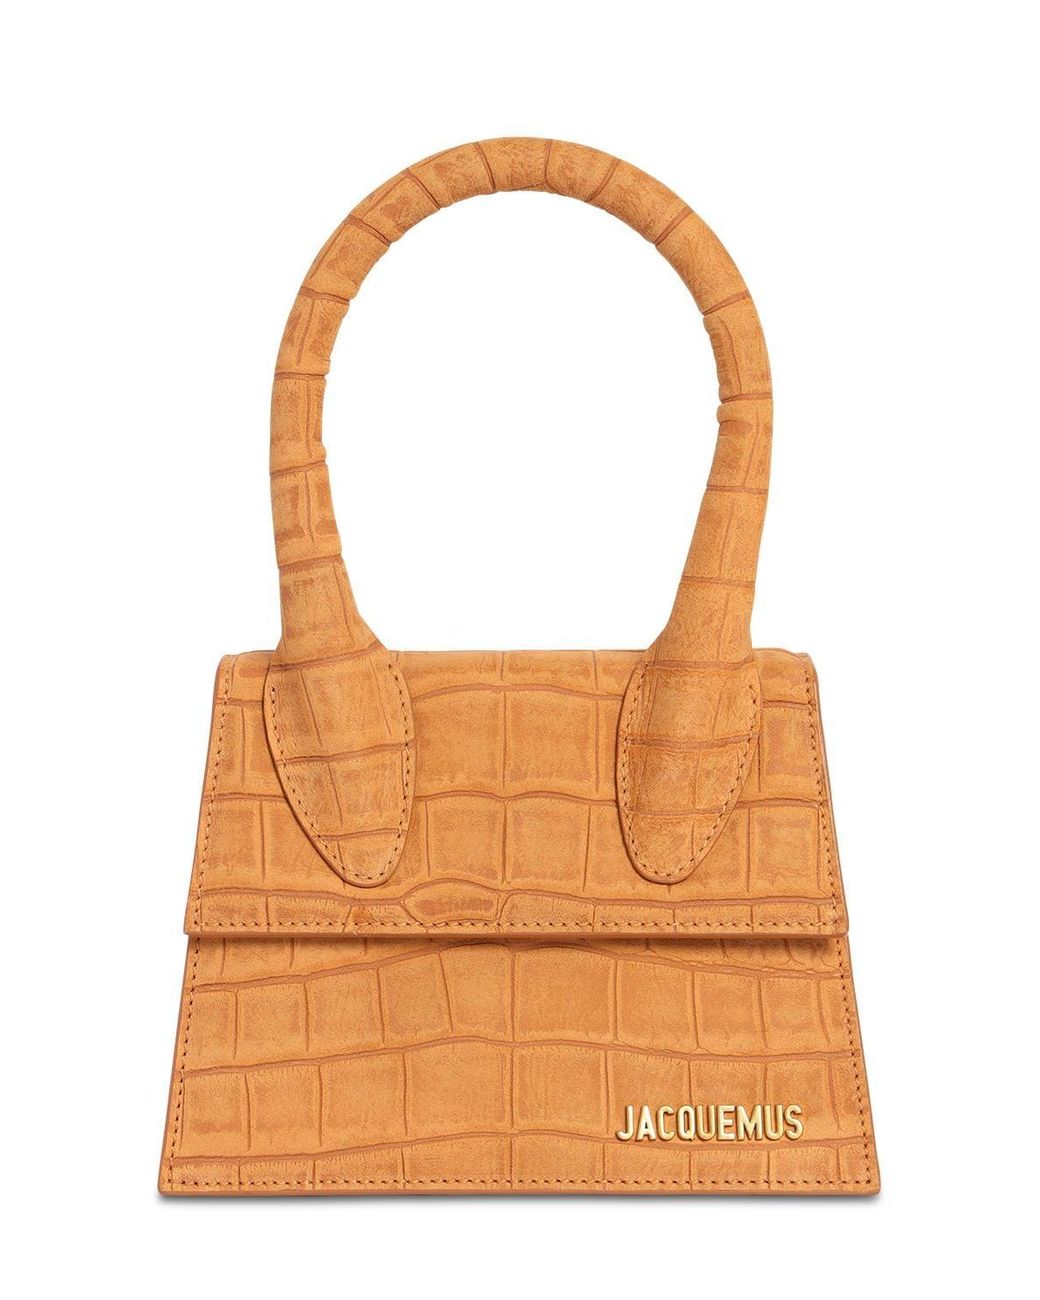 Jacquemus Le Grand Chiquito Embossed Leather Bag in Honey (Brown) - Lyst